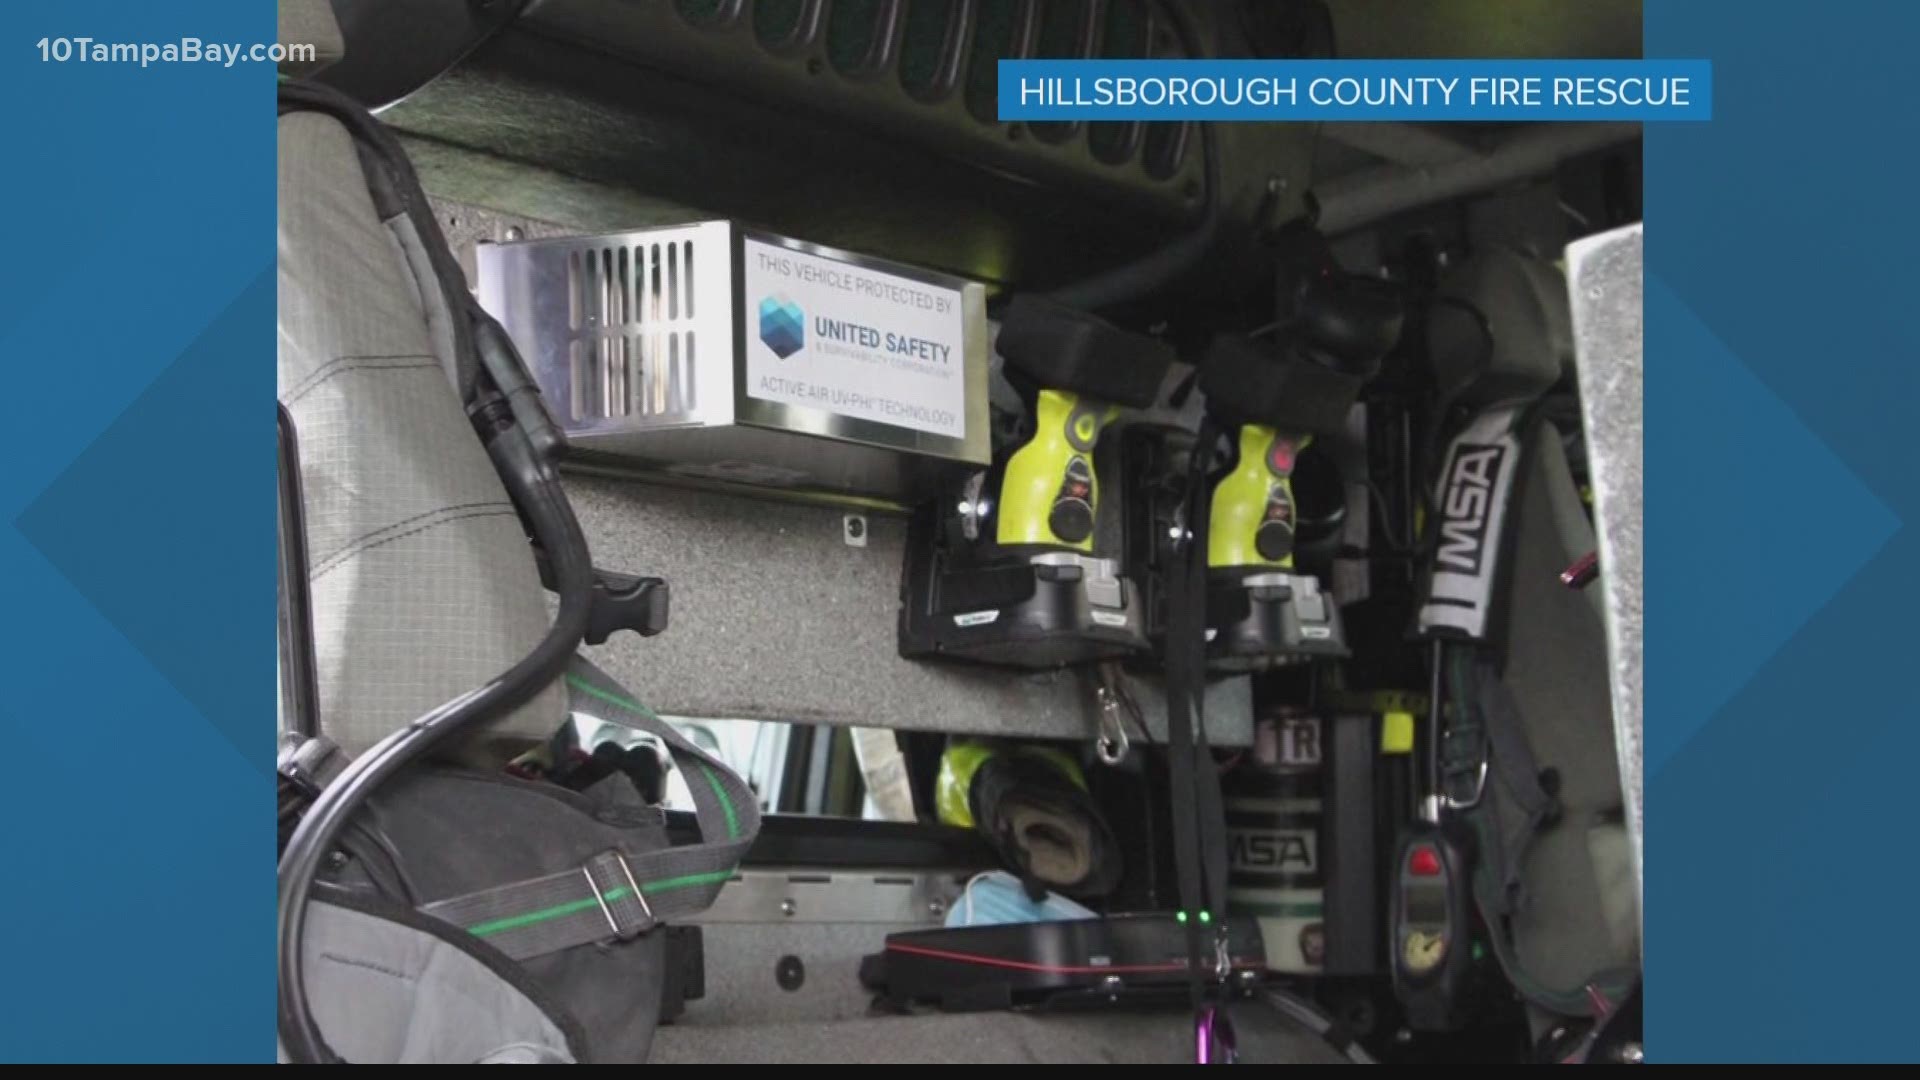 Hillsborough County Fire Rescue now has Active Air Purification Systems in trucks, ambulances to help clean the air when out on a call.